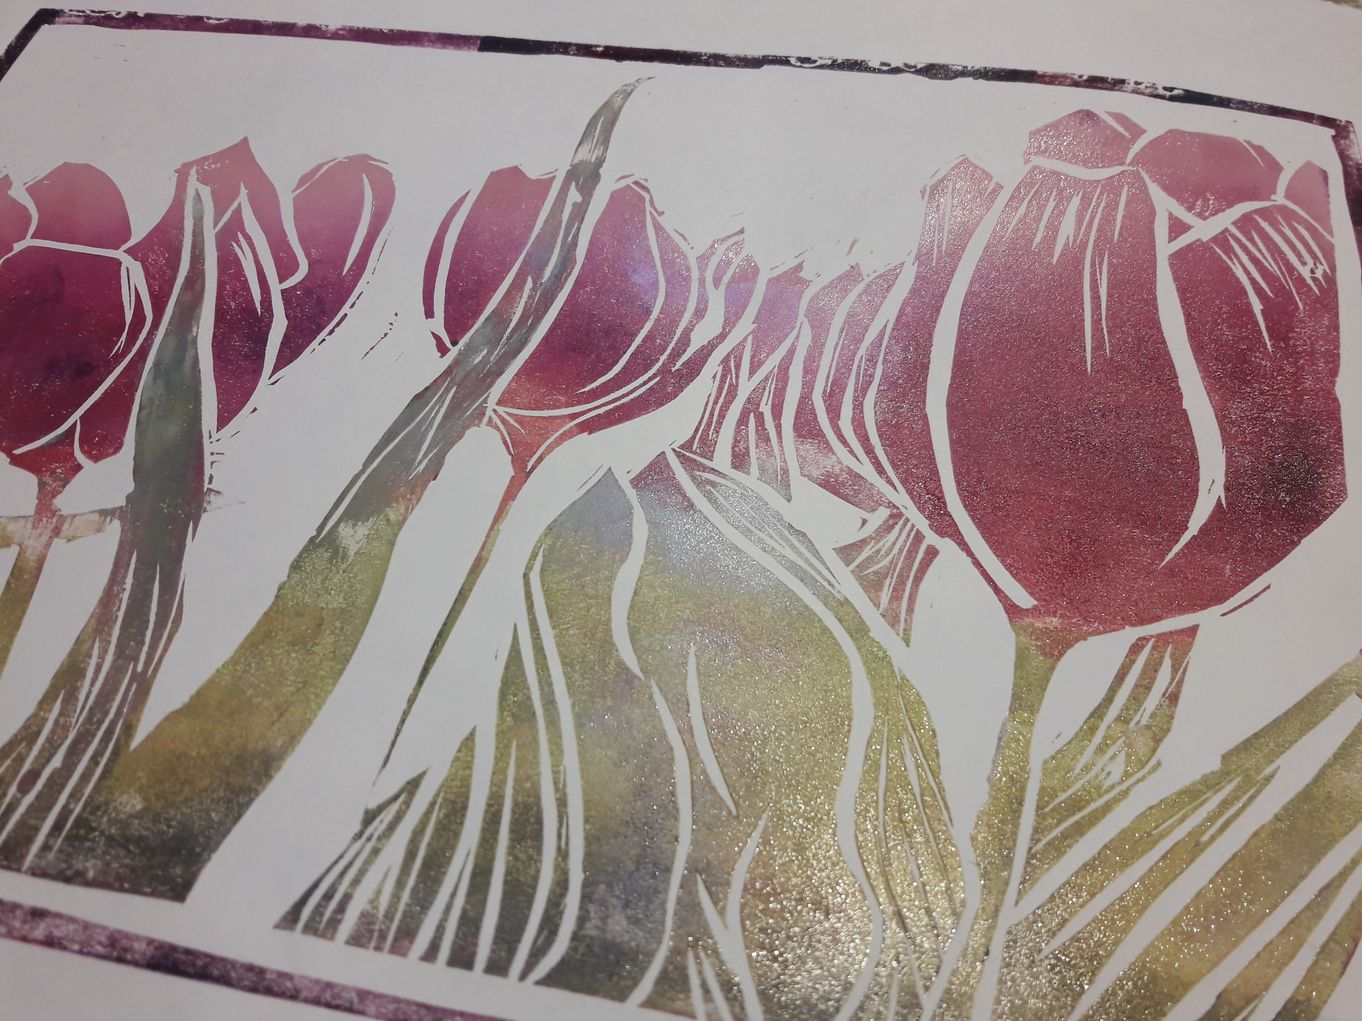 Lino Cut Print - Botanical & Natural forms with Laura Sowerby